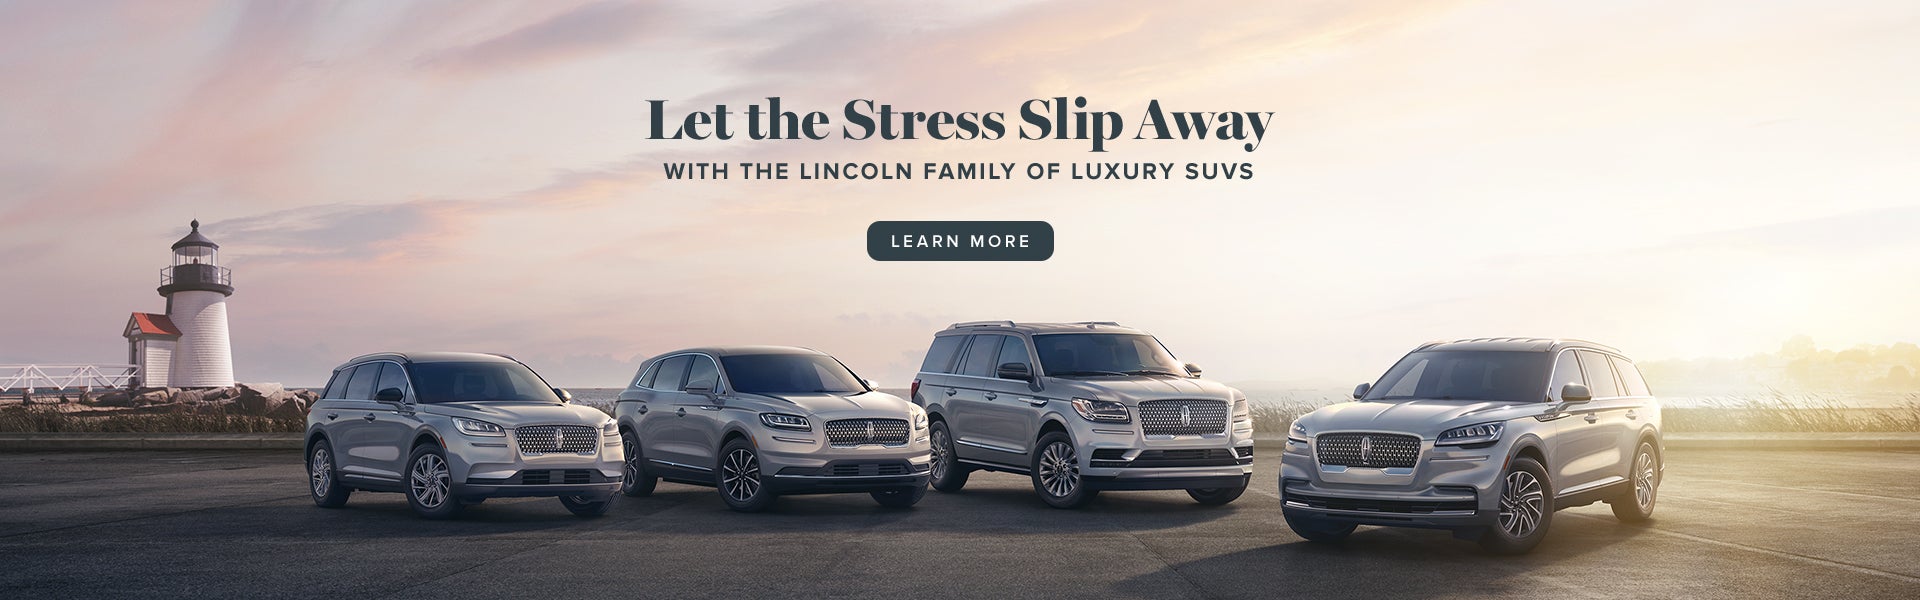 The Lincoln Family of Luxury SUVs